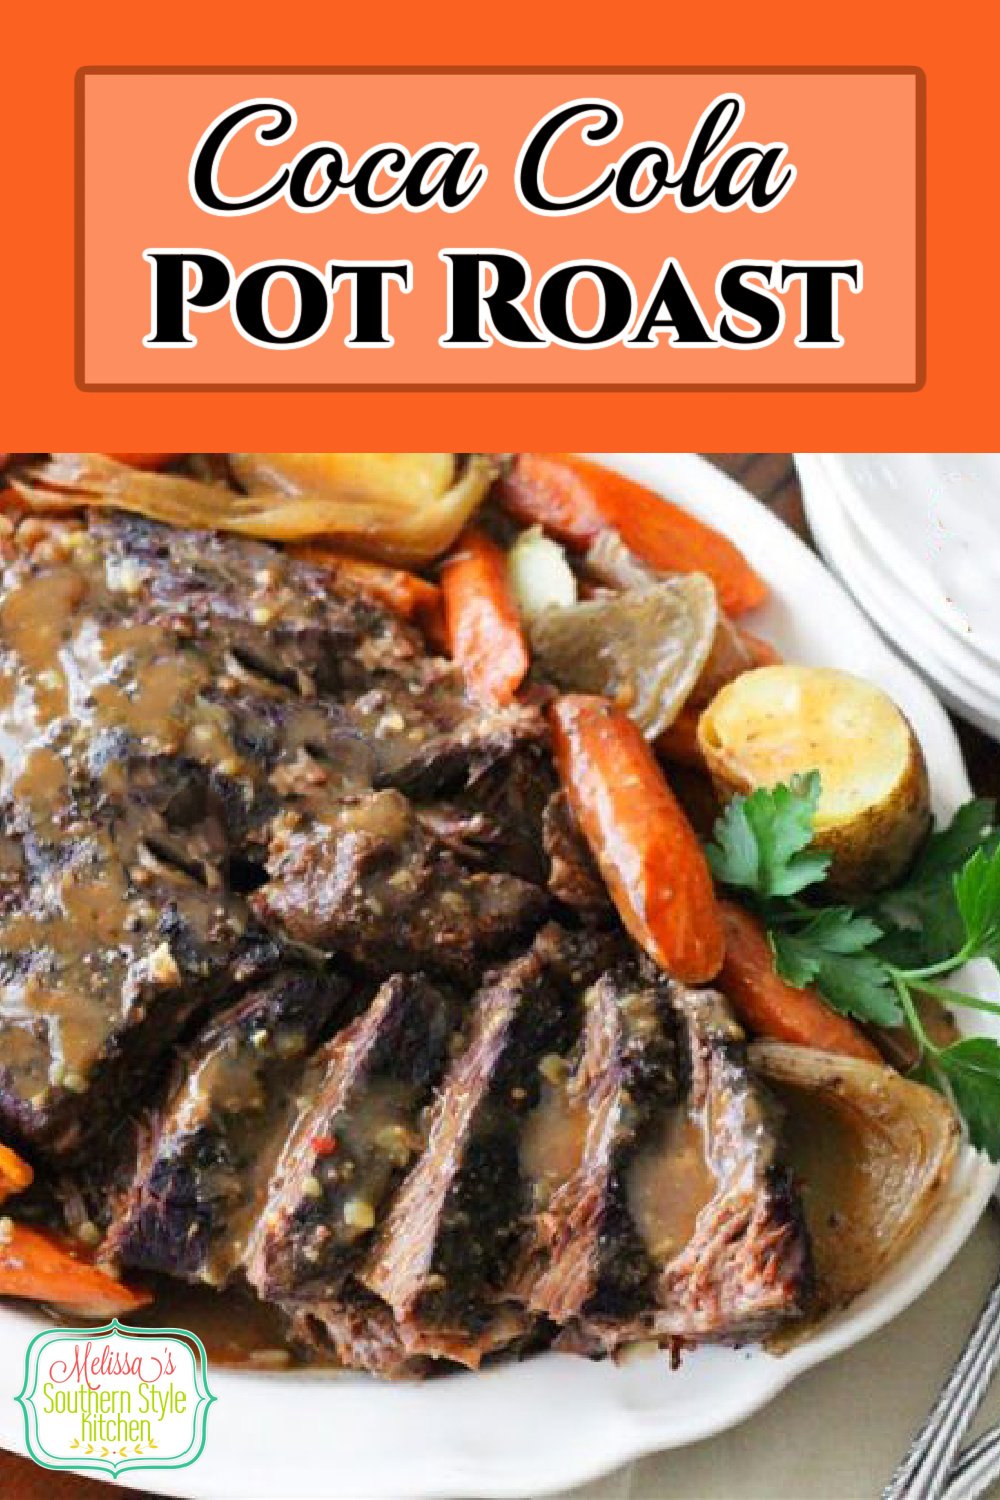 This tender and succulent Coca-Cola Pot Roast is slow simmered in a rich au jus made with select seasonings and coca cola #slowcookedpotroast #slowcookerroast #cocacolaroast #easyroastrecipes #cocacola #aujus #roastrecipes